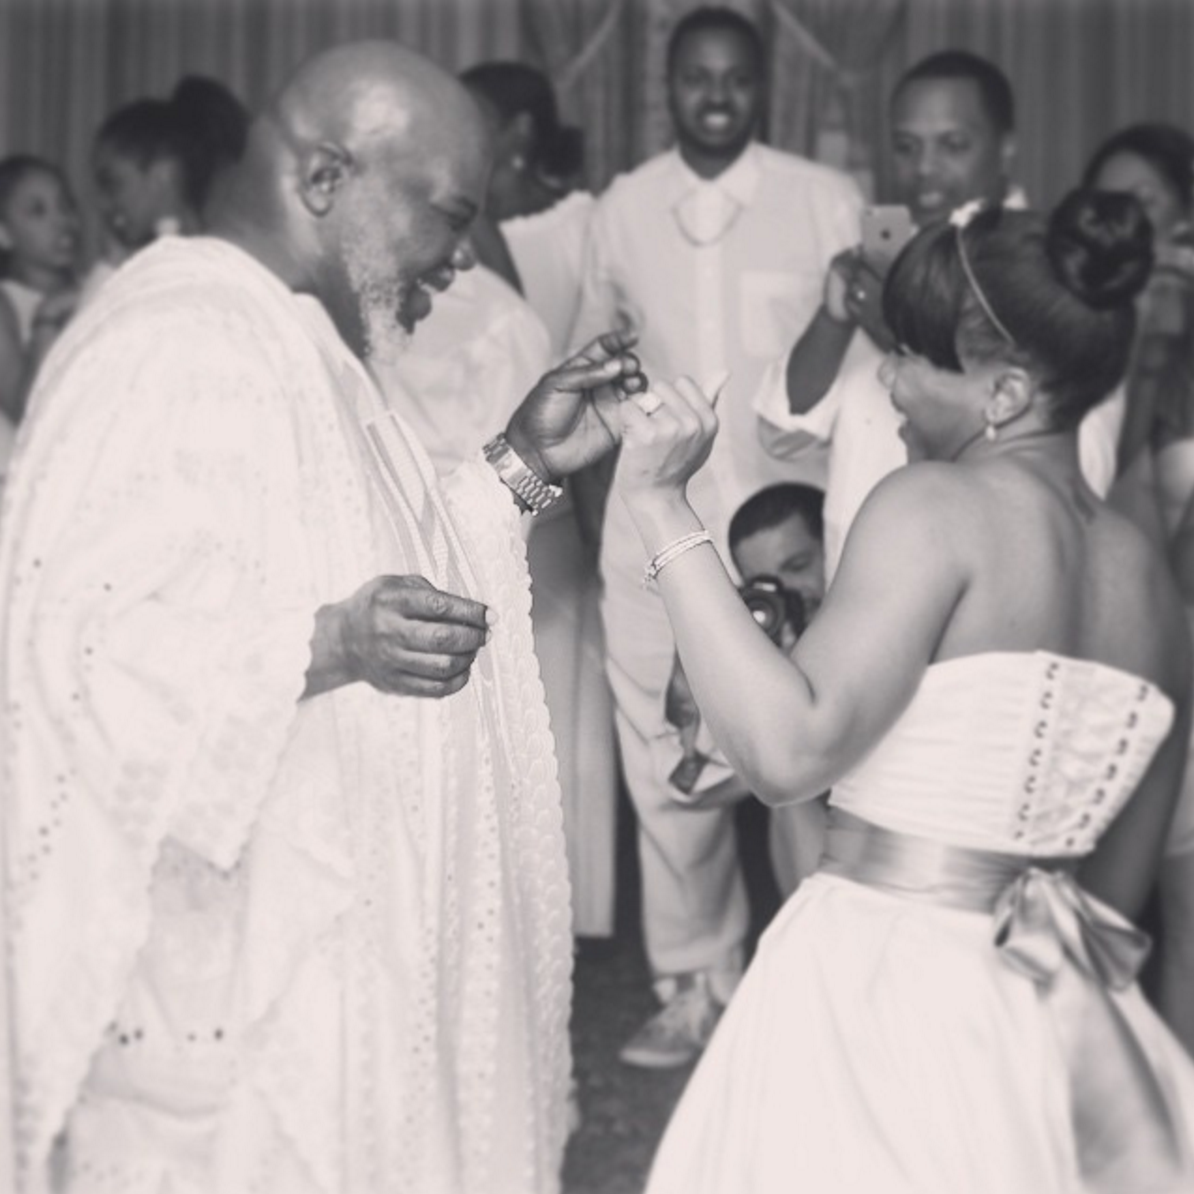 6 Beautiful Times Celebrity Dads Proudly Walked Their Daughters Down the Aisle
